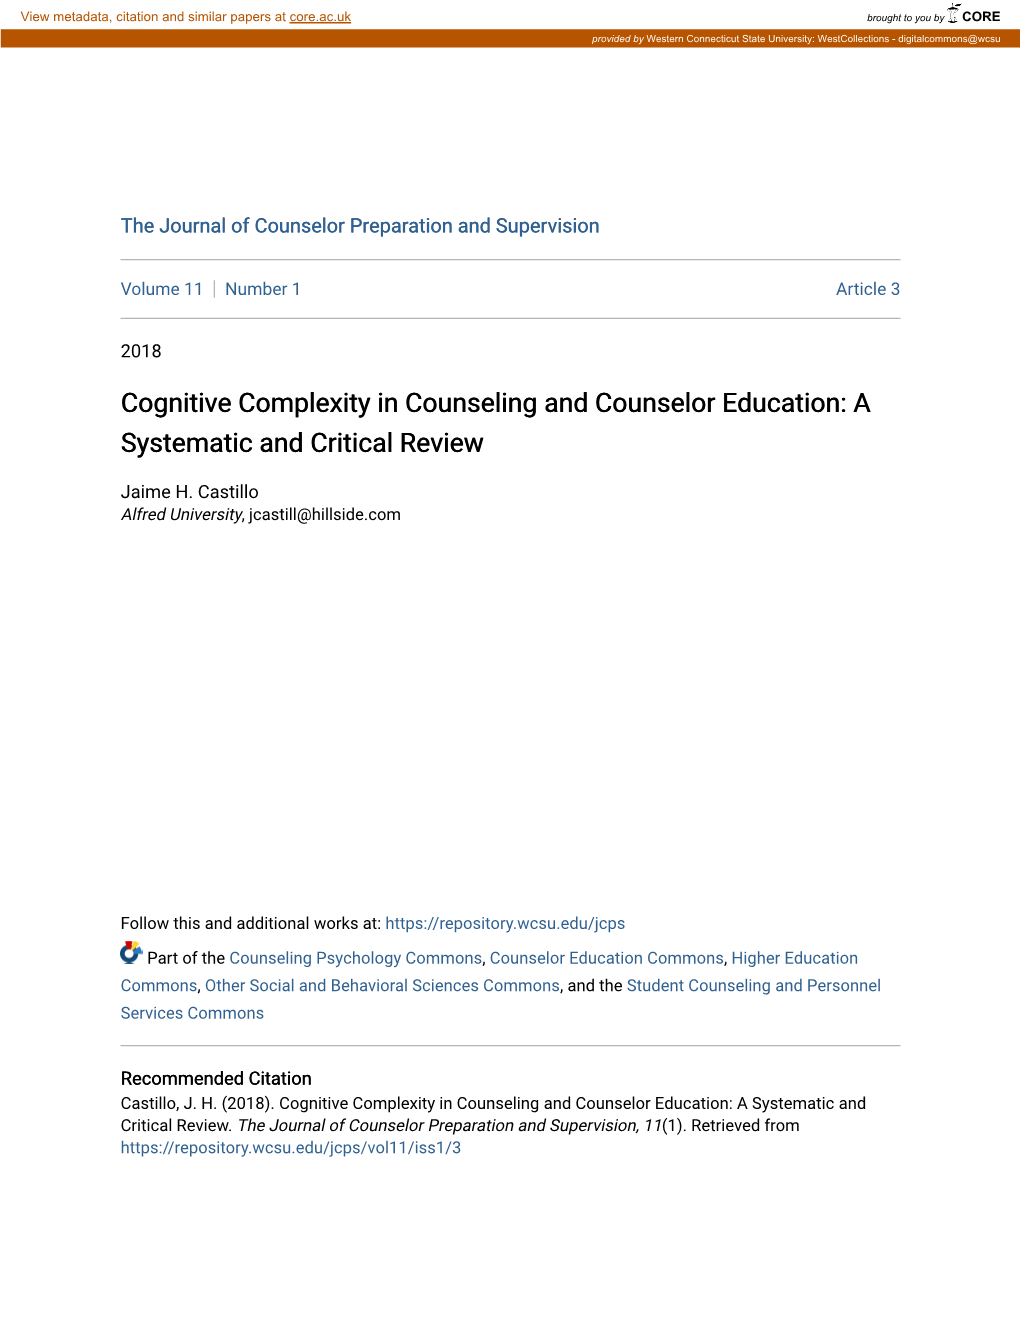 Cognitive Complexity in Counseling and Counselor Education: a Systematic and Critical Review